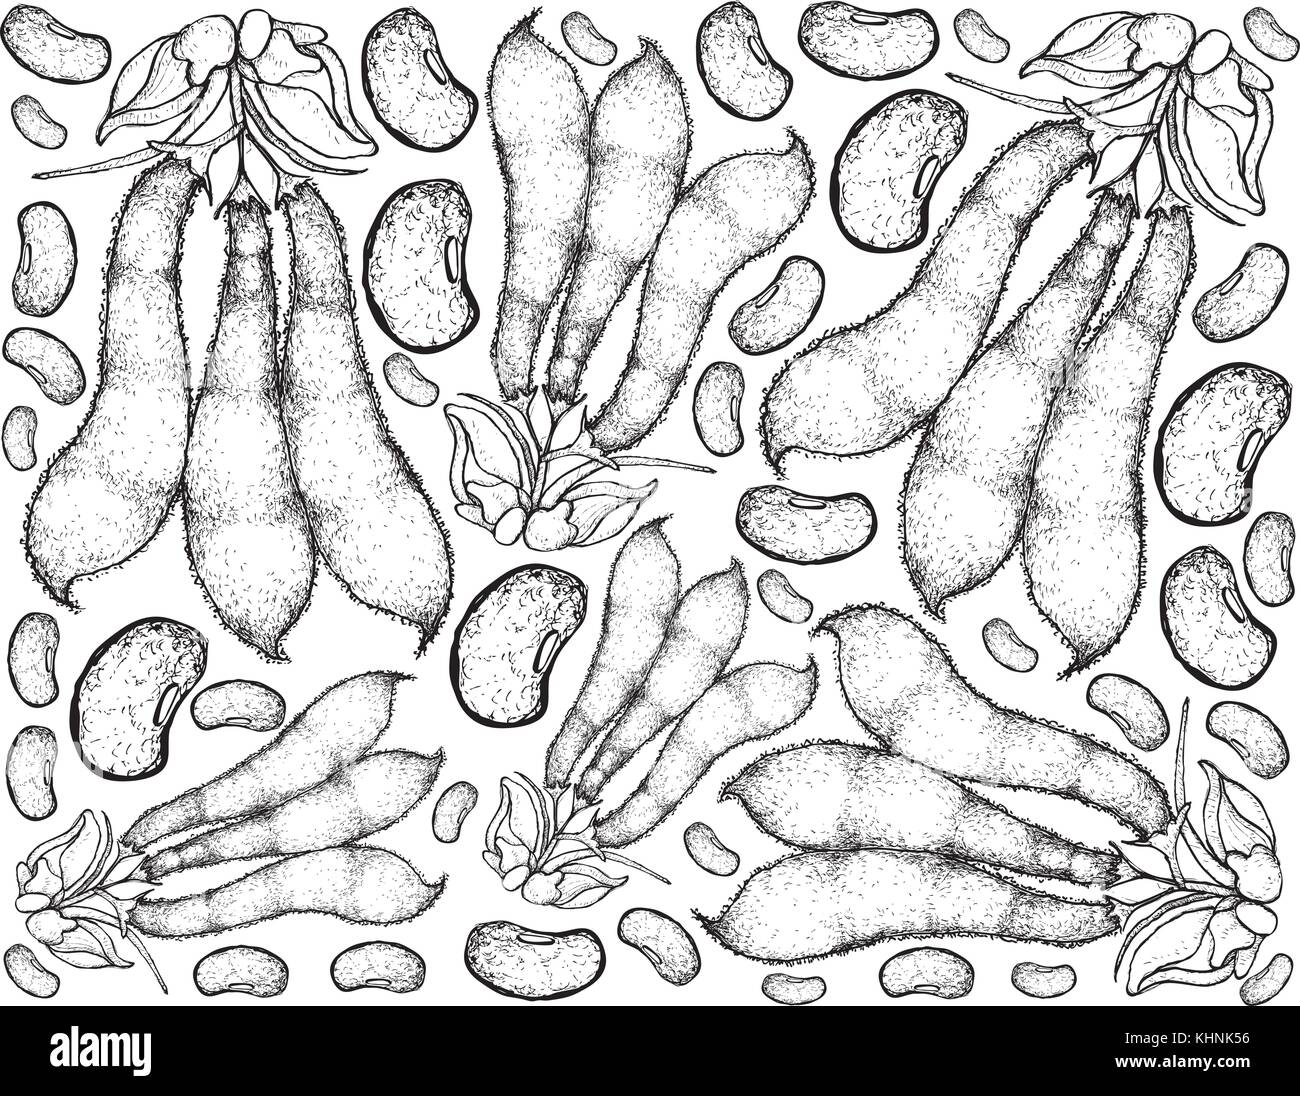 Vegetable, Illustration Background Pattern of Hand Drawn Sketch Velvet Bean or Mucuna Pruriens Pods, Good Source of Dietary Fiber, Vitamins and Minera Stock Vector